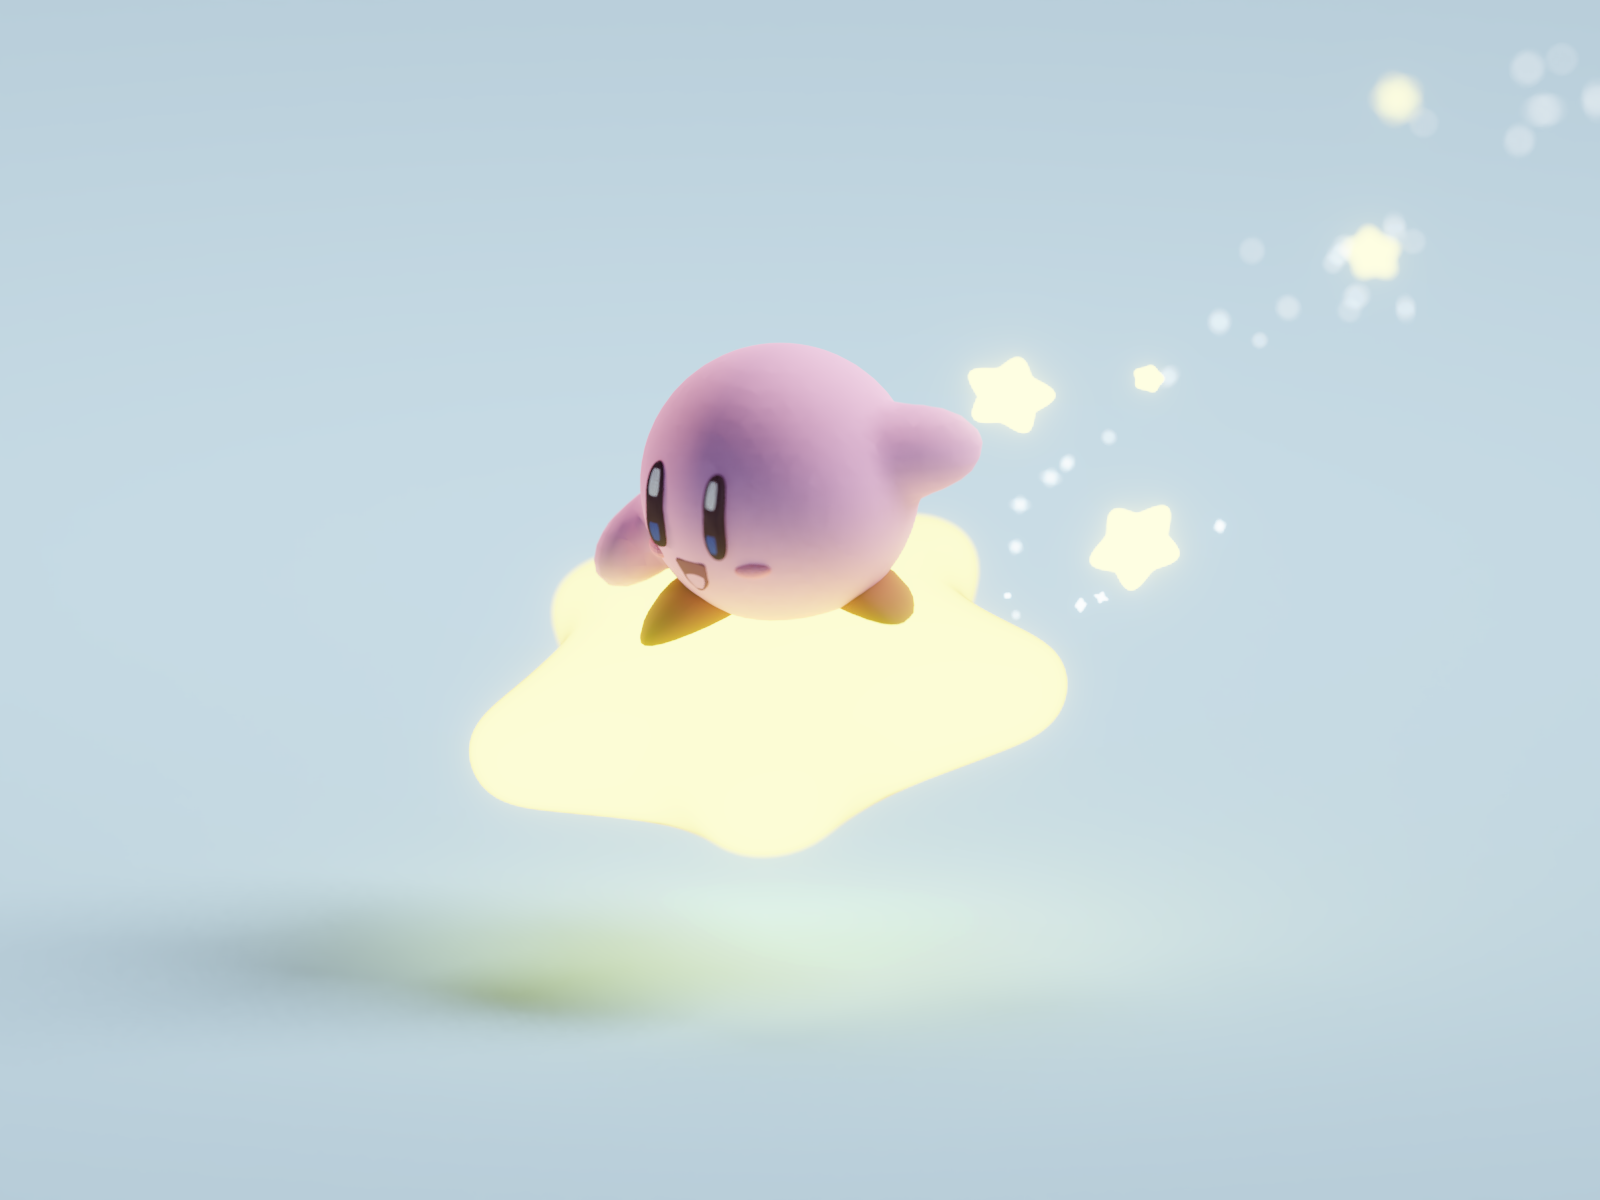 Quick Kirby Render by Mohamed Chahin on Dribbble